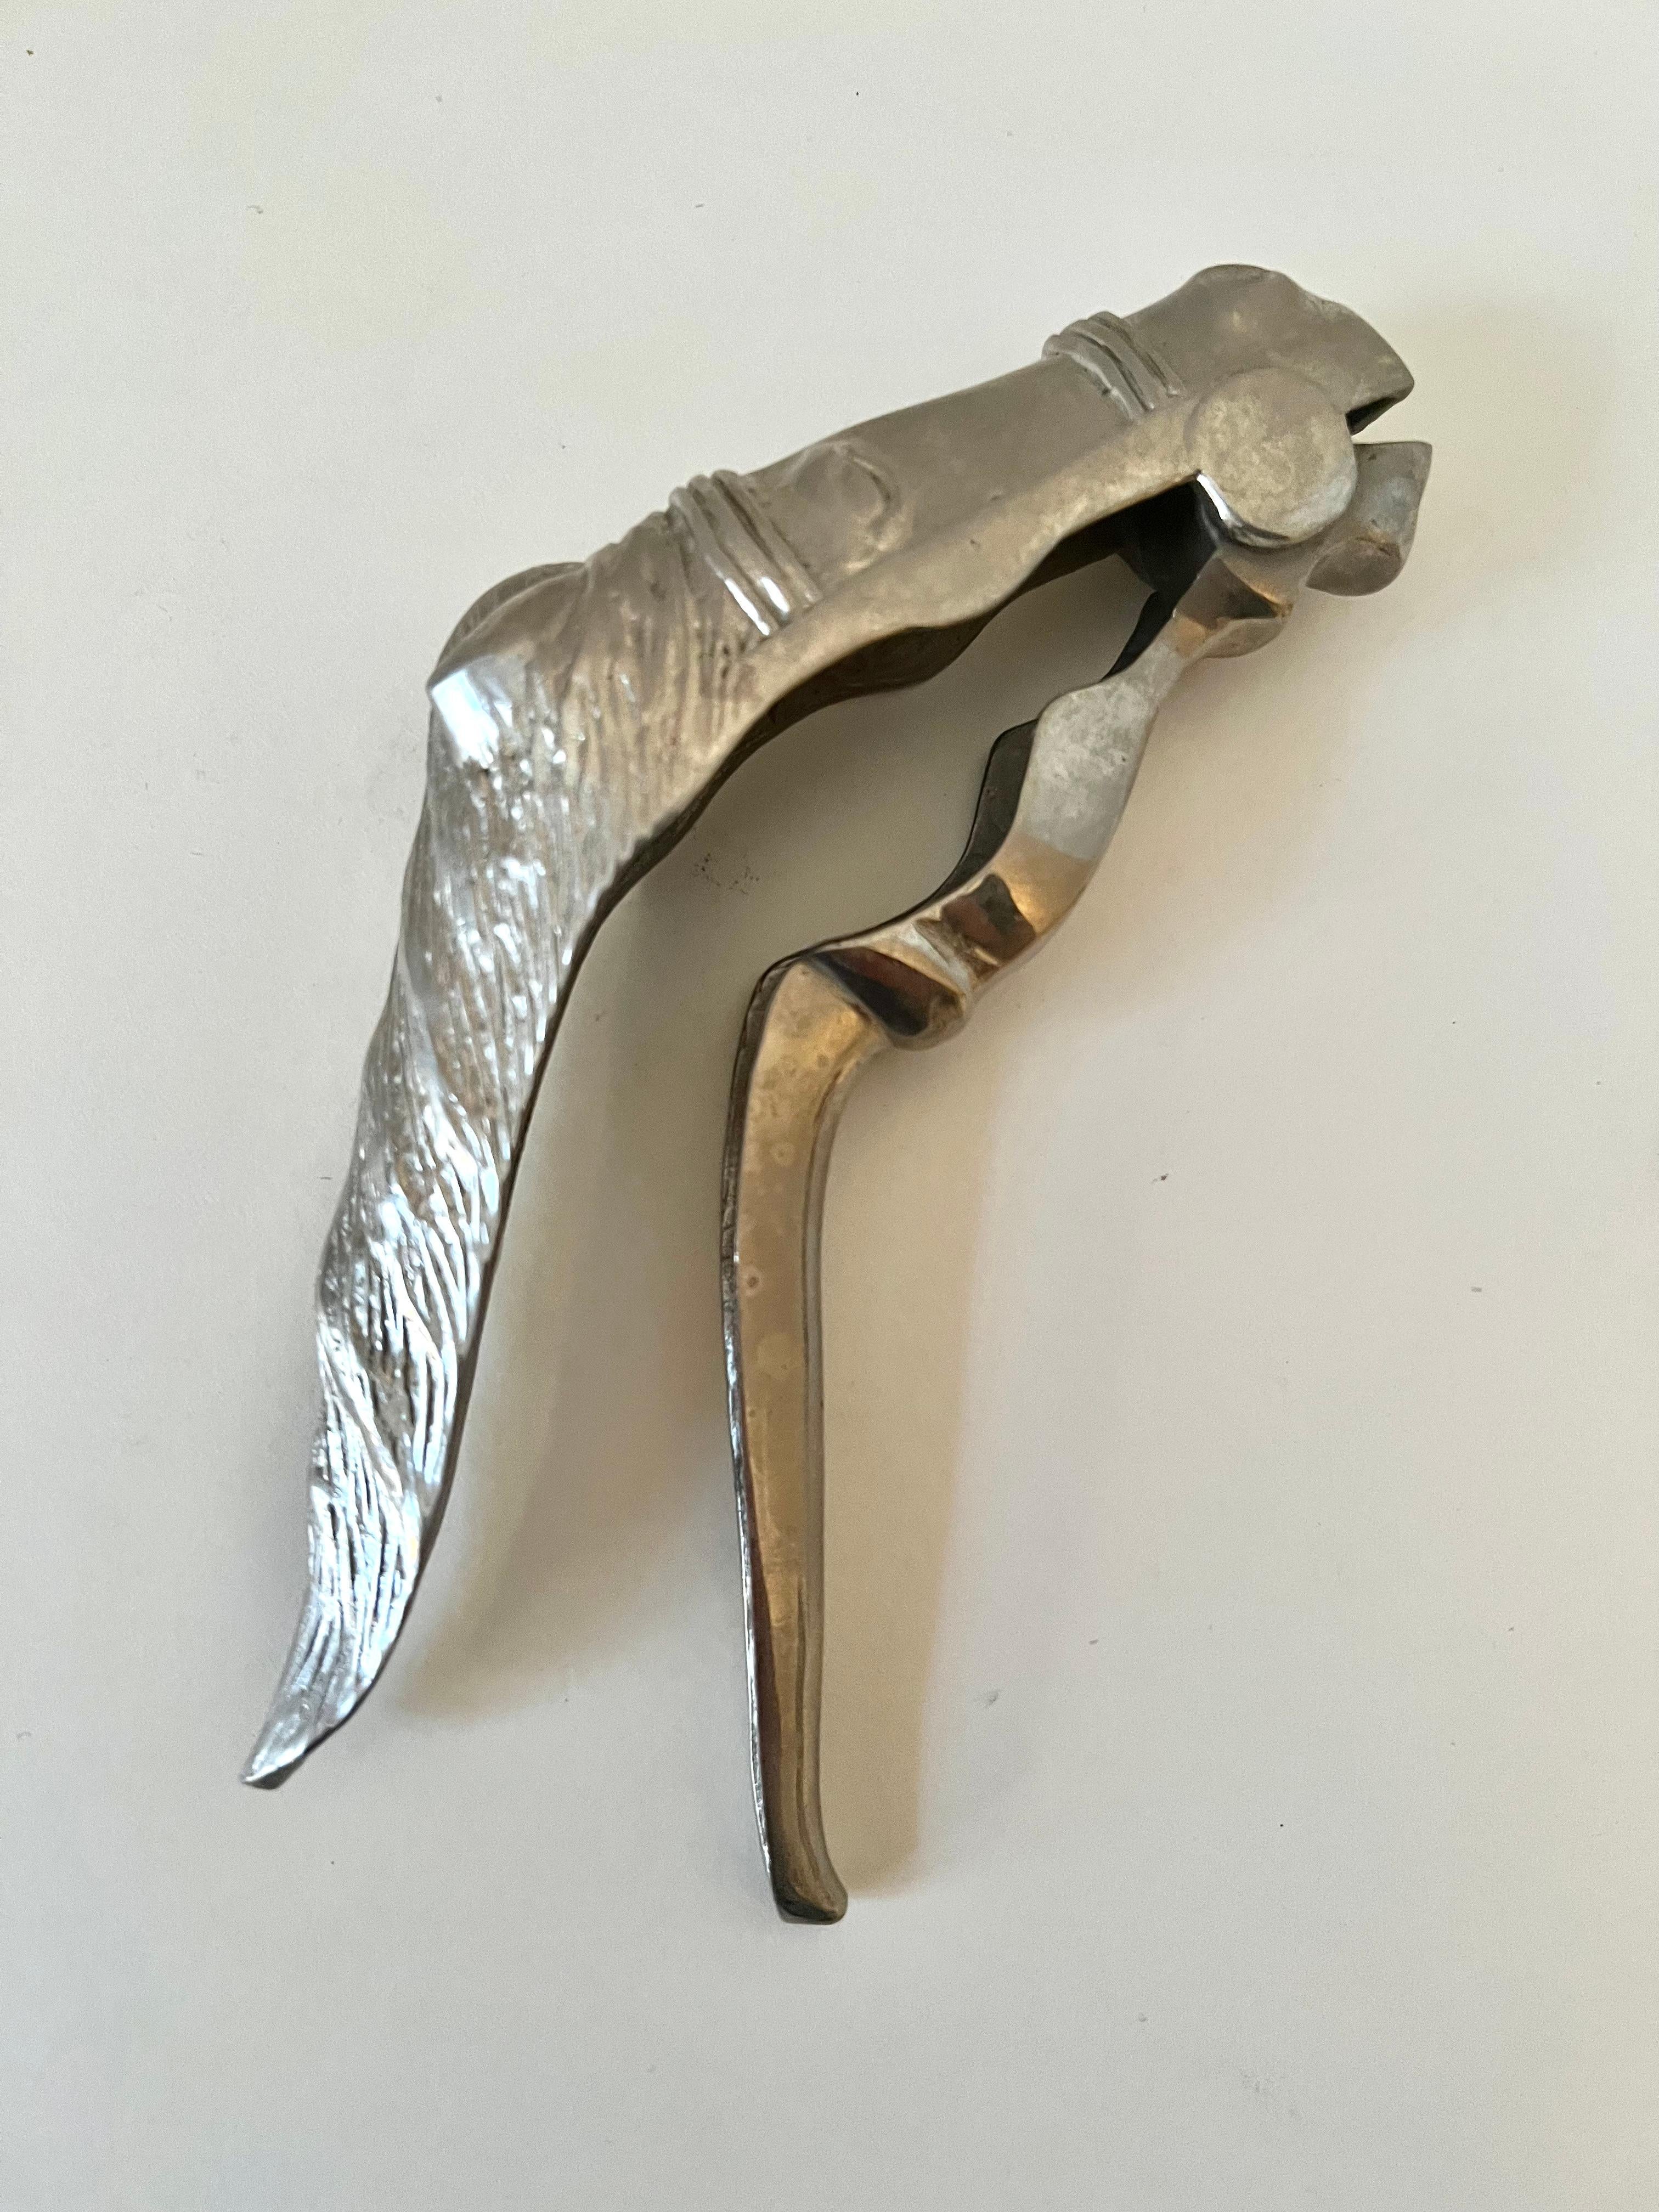 Silver plate nut cracker by Cesare Piccini Italy.  The piece may have been a GWP?  Cesare Piccini is known for fine hand bags.  

I lovely practical piece or an be purely decorative.

Great for the holidays,,. a hostess gift or housewarming